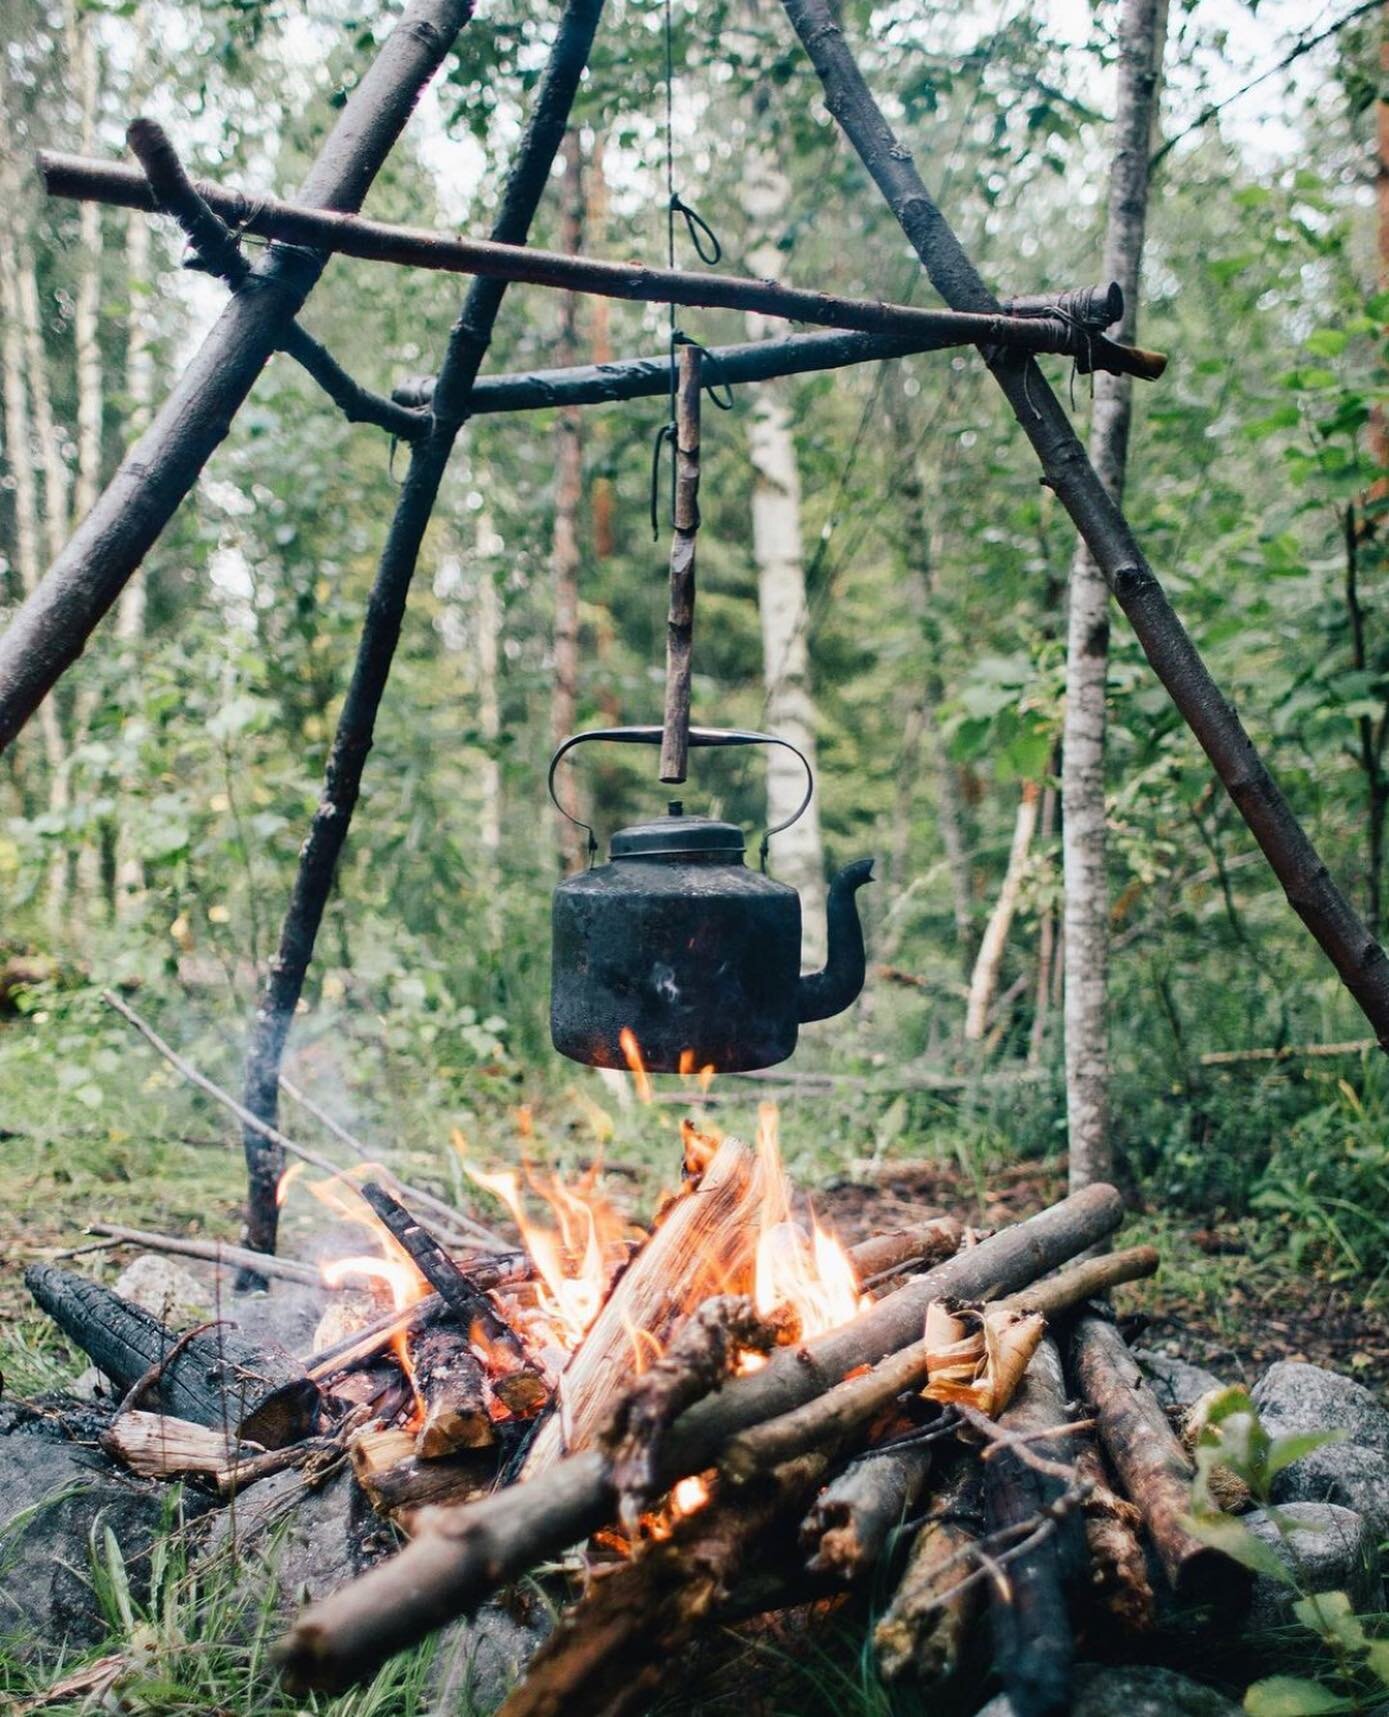 &quot;Coffee is the great incentiviser in the office.&quot; - Michael Scott
.

#campfire #camping #nature #bushcraft #outdoors #adventure #fire #camp #hiking #campinglife #survival #outdoor #travel #forest #photography #wilderness #campfirecooking #c